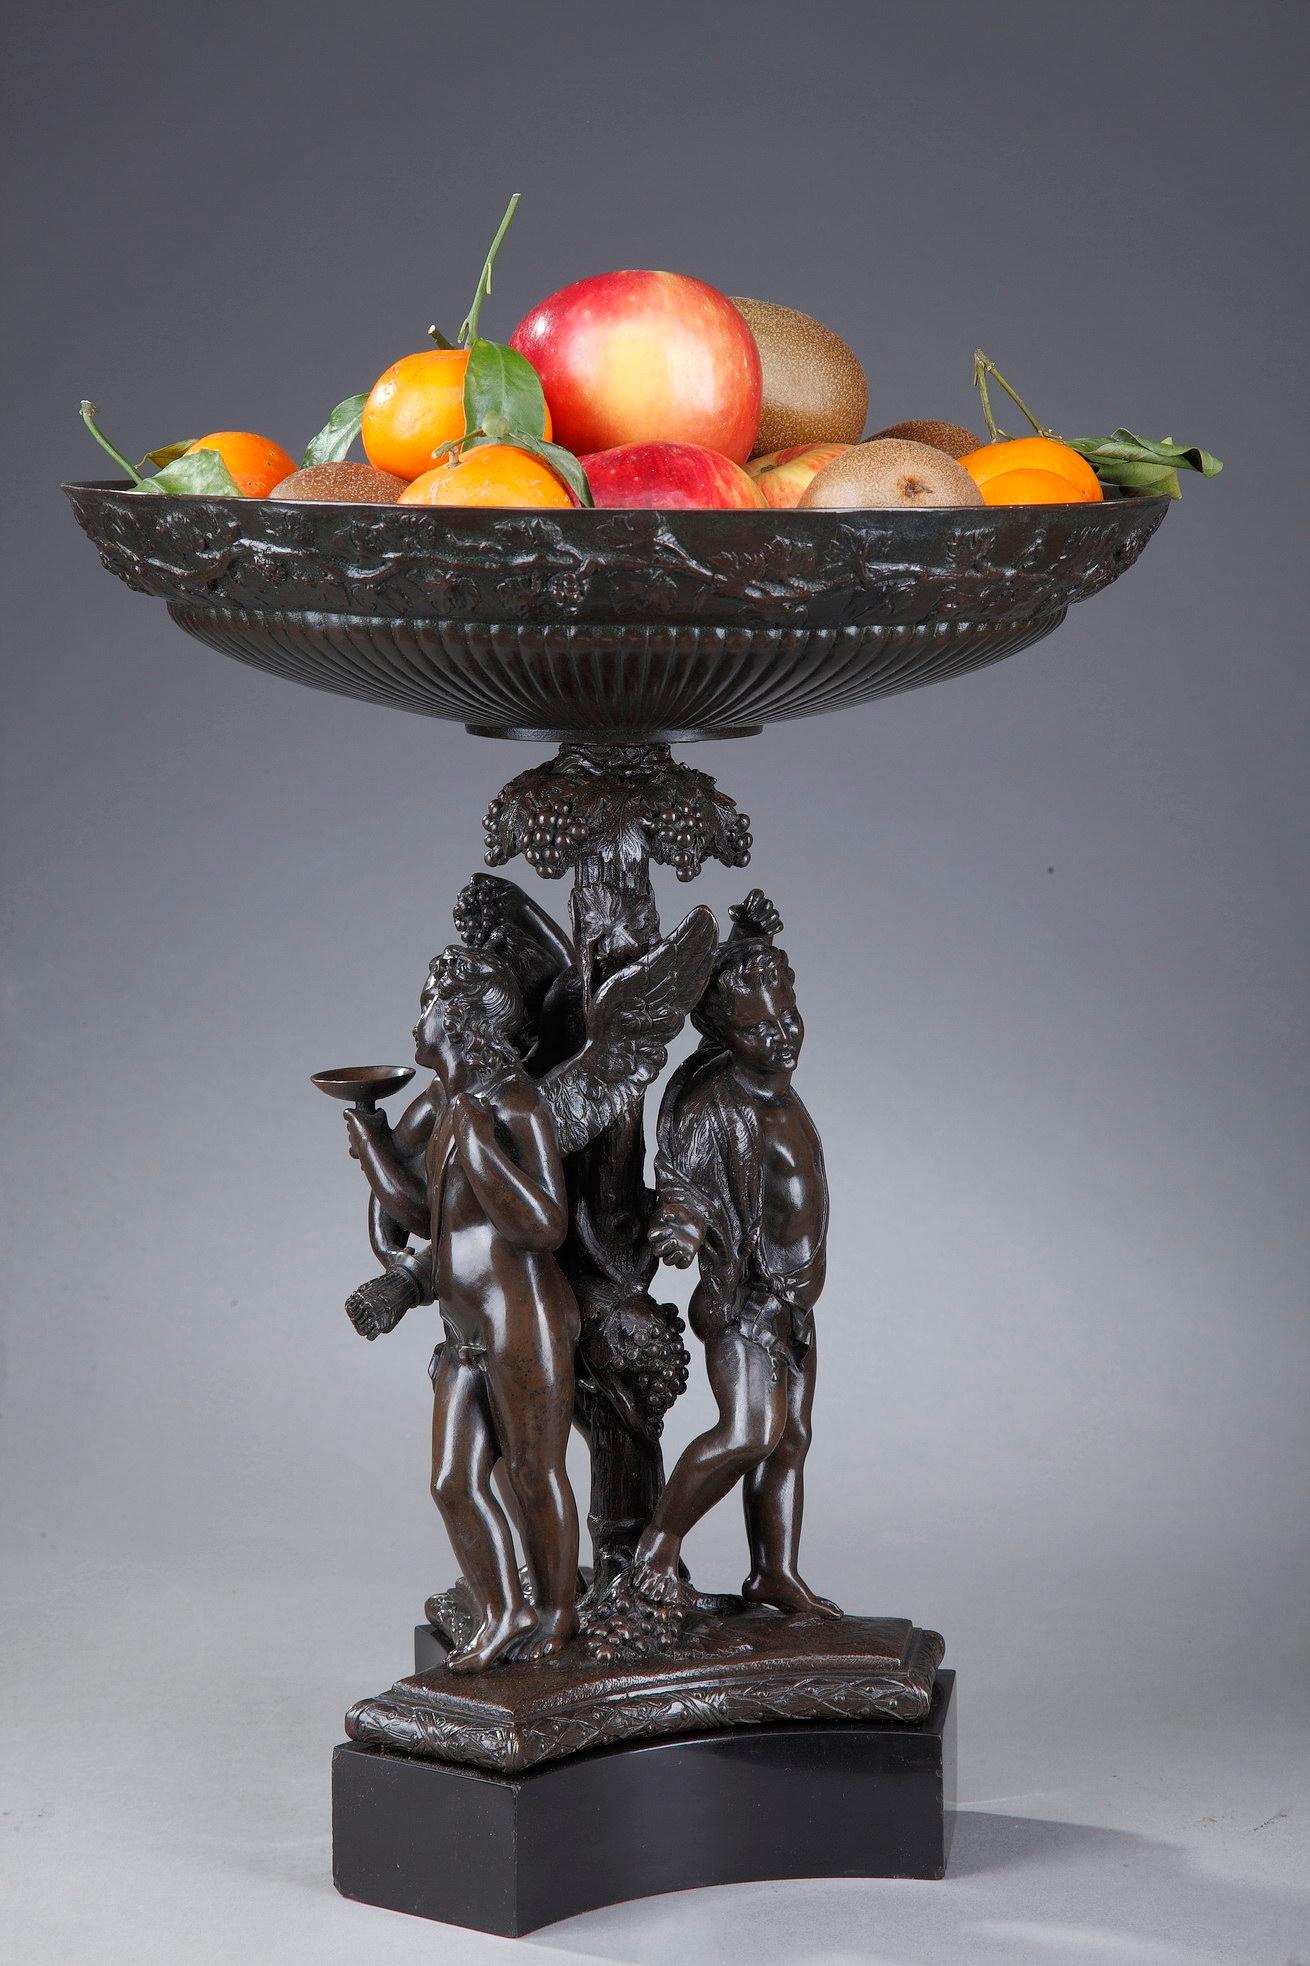 Carved of patinated bronze, this 19th century fruit bowl boasts a mythological scene with three winged Cupids wearing vine leaves, holding a cup and grapes. They are leaning against the central foot, which is richly decorated with vine leaves and